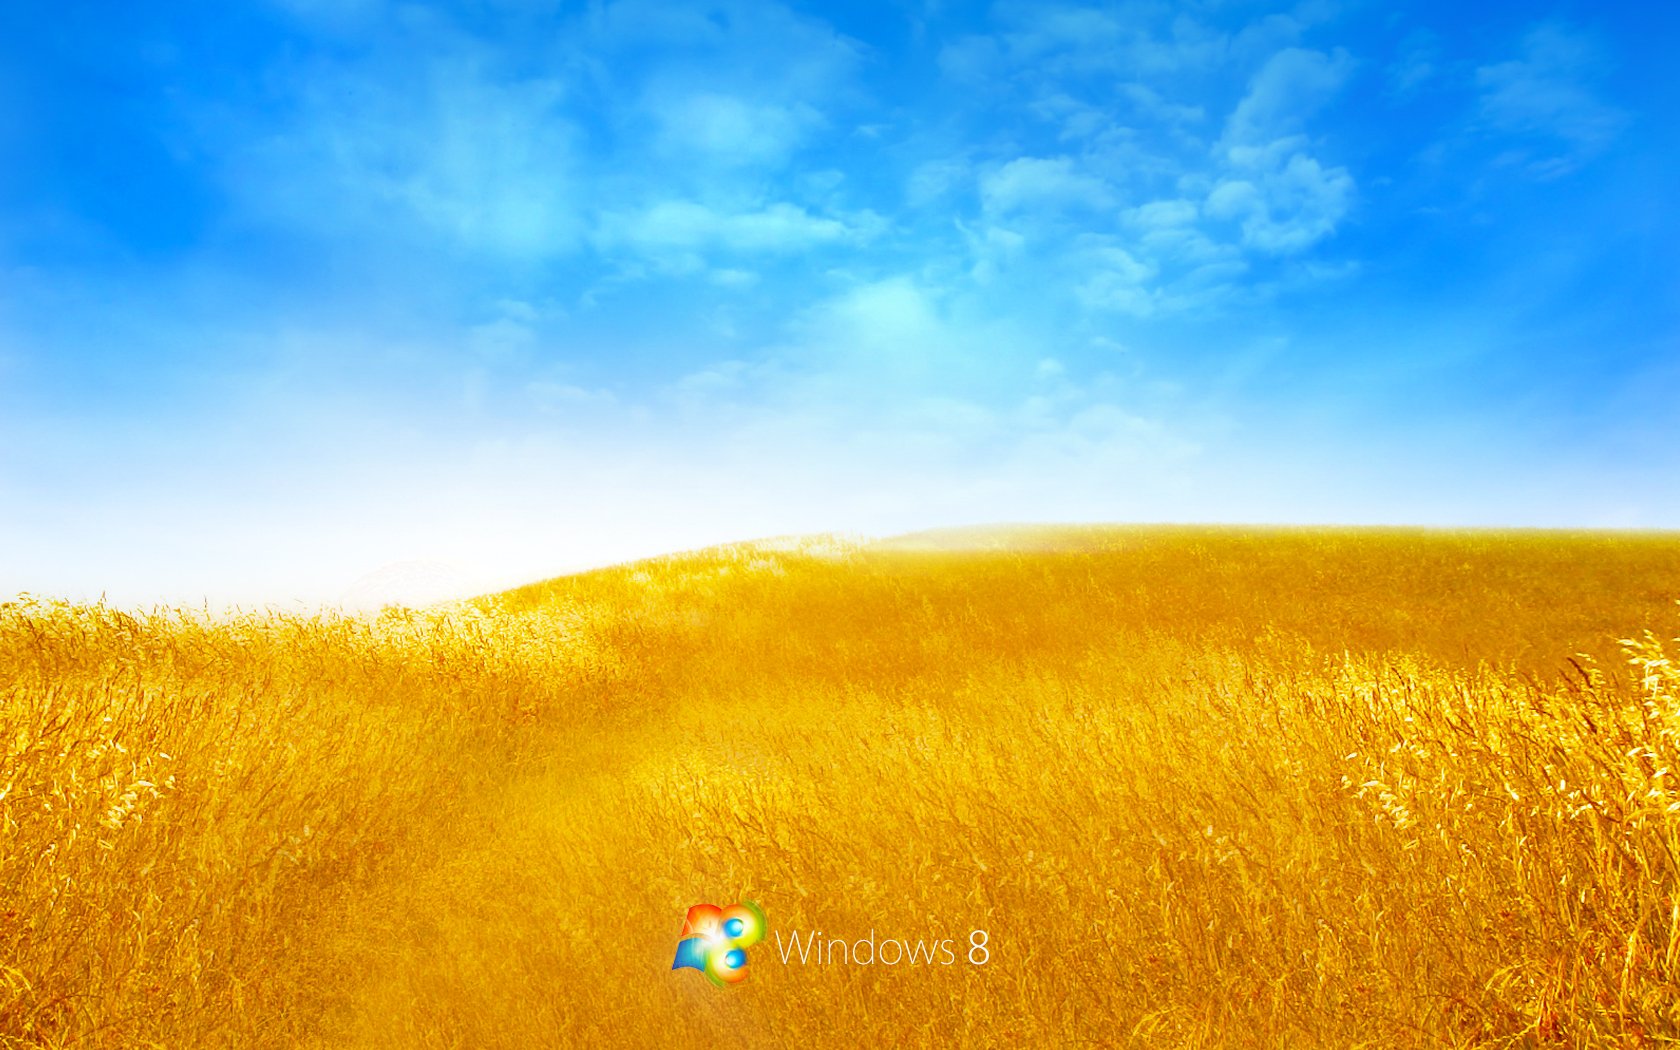 Windows 8 Bliss by rehsup